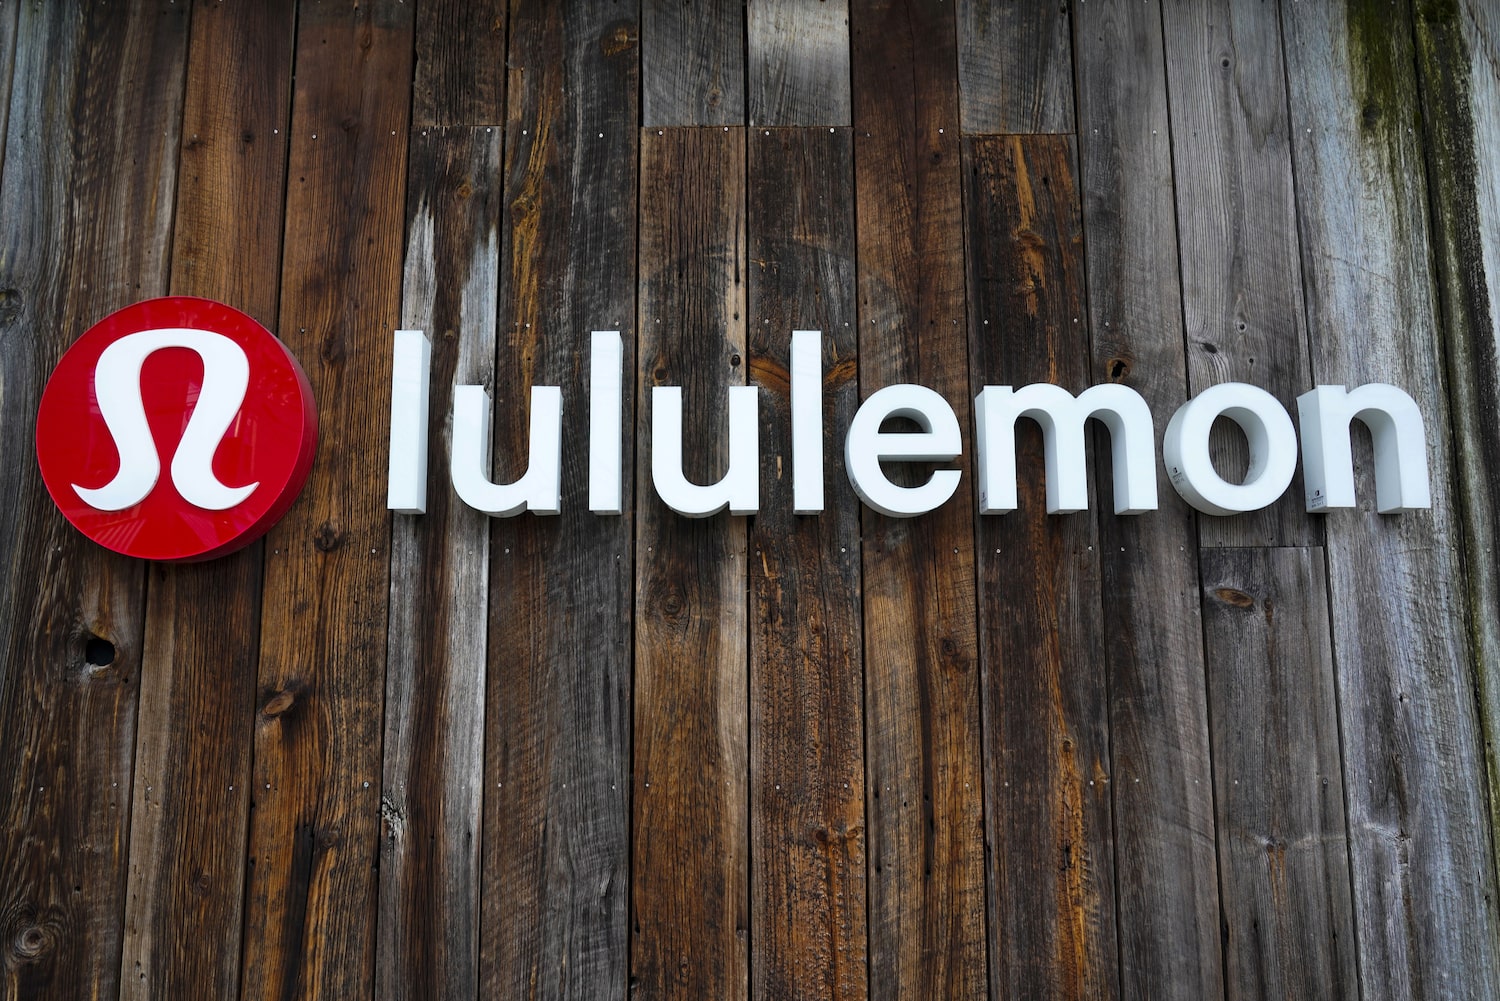 Lululemon shares sink on disappointing outlook, slowdown in U.S.